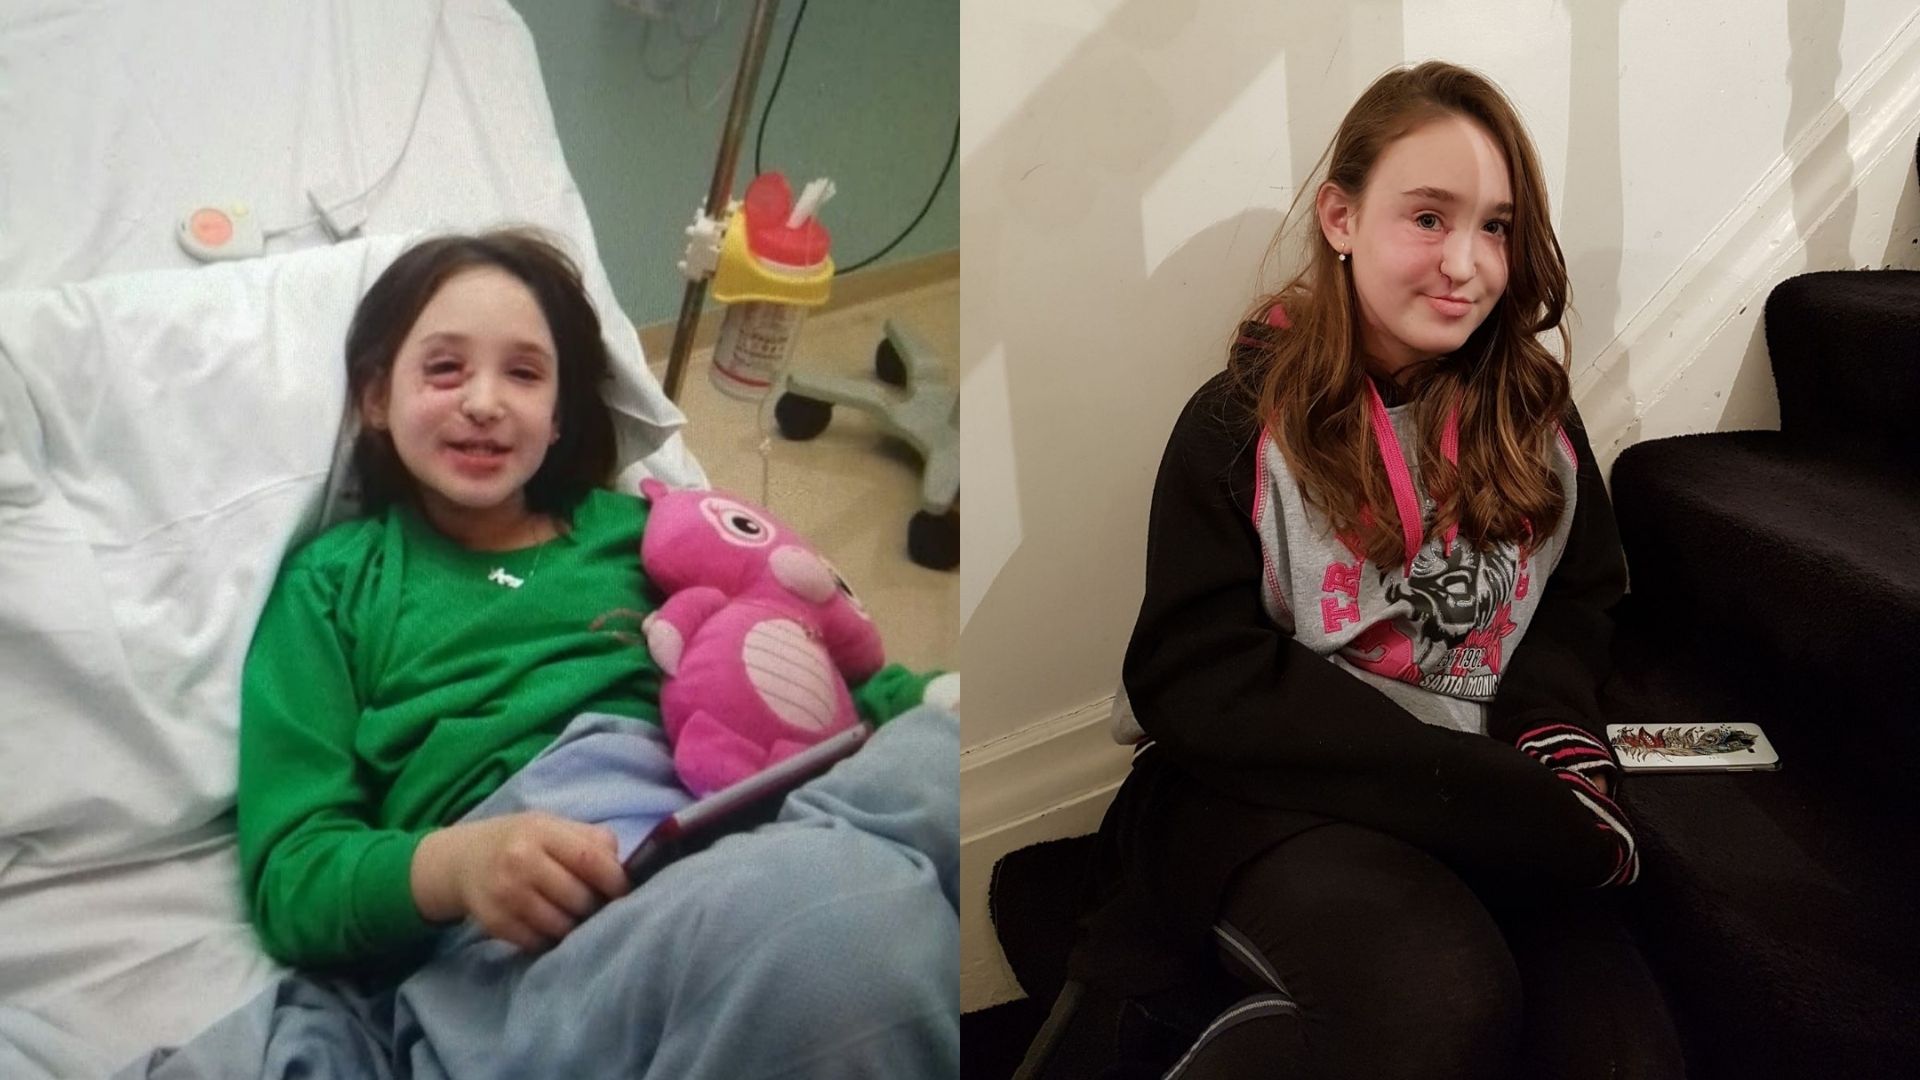 Left: Abigail, pictured at age 7-8. She has medium length dark brown hair and her eye is swollen. She's wearing a green jumper and is sitting in a hospital bed with a pink toy. Right: Abigail, at age 16. She has long light brown hair and facial scarring. She's wearing a grey and black hoodie with pink attachments. She's sitting on the stairs and looking at the camera.